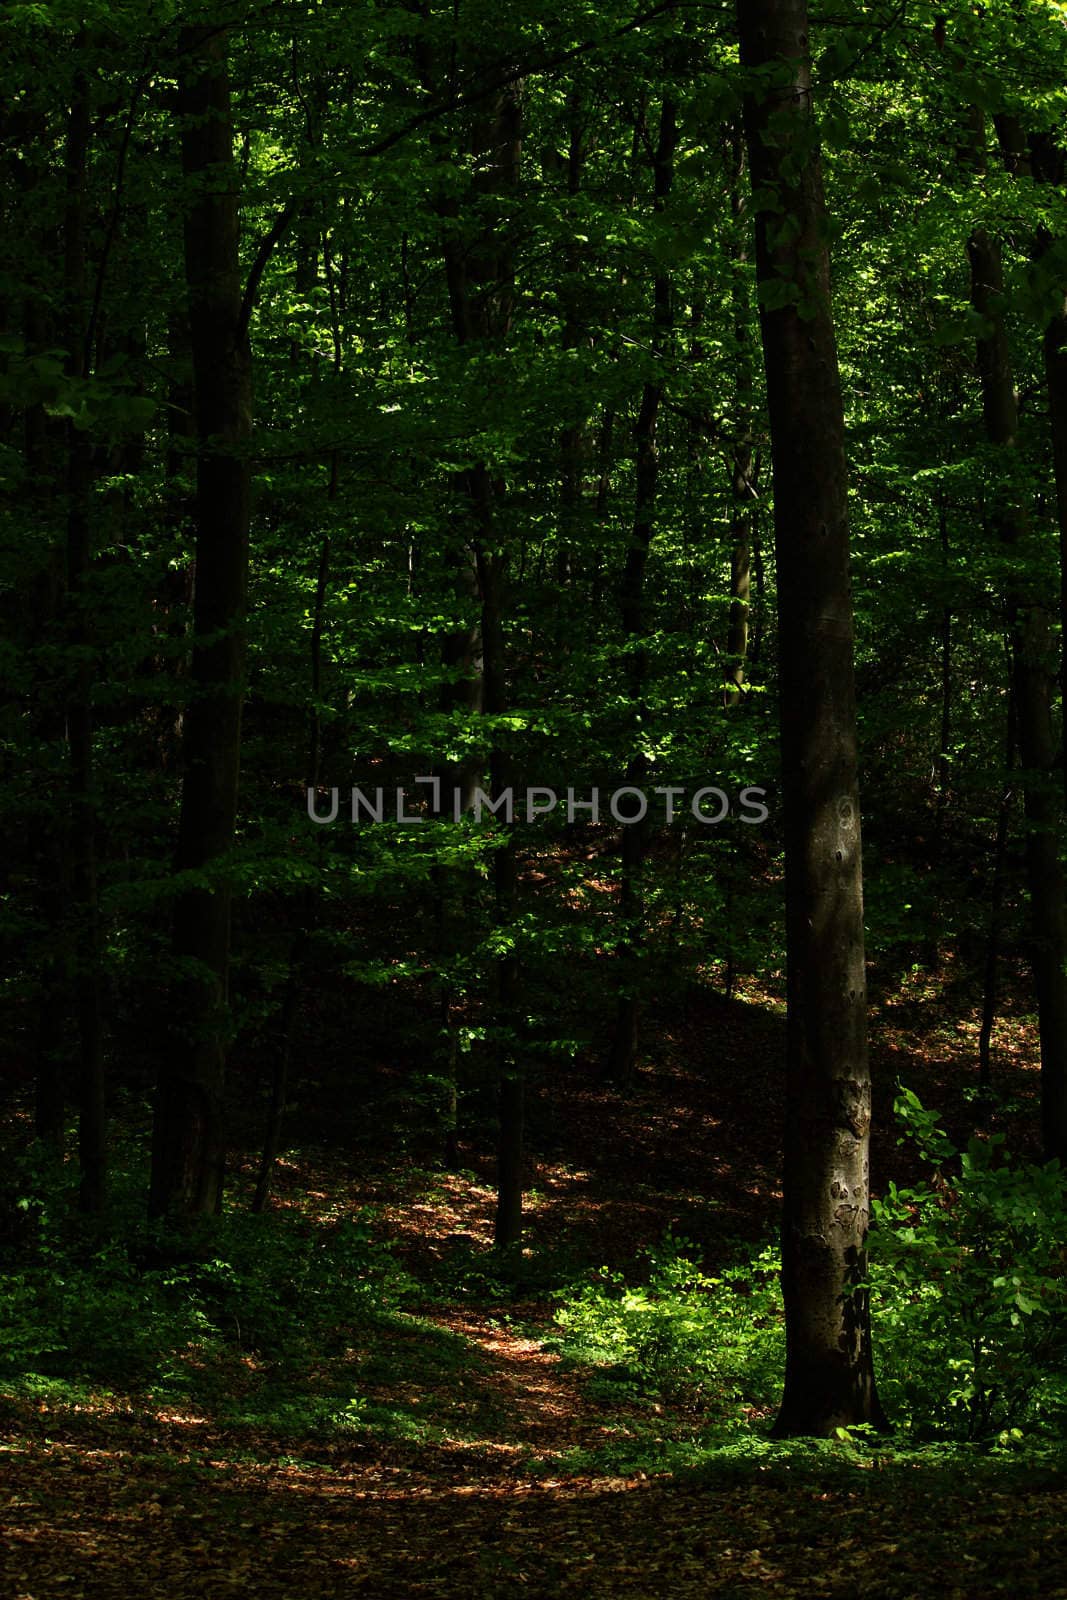 deciduous forest with European Beech trees